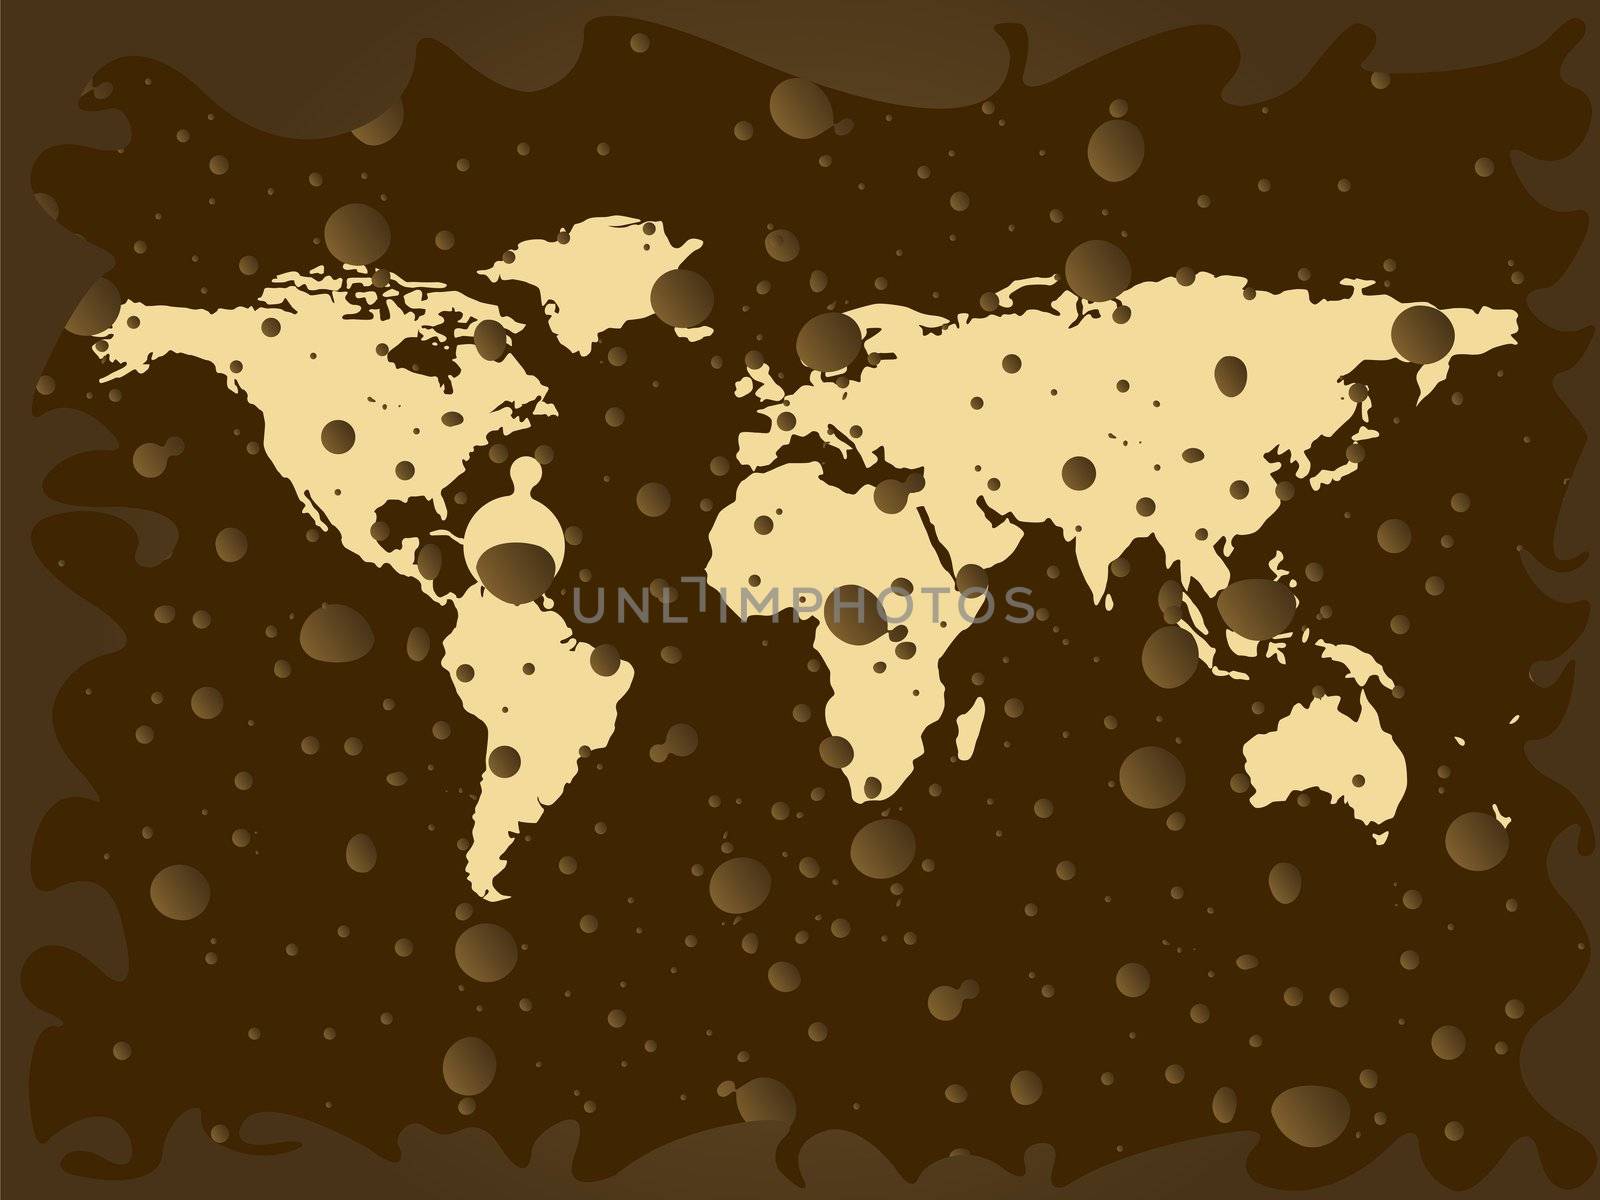 world map with colored earth bubbles, abstract art illustration